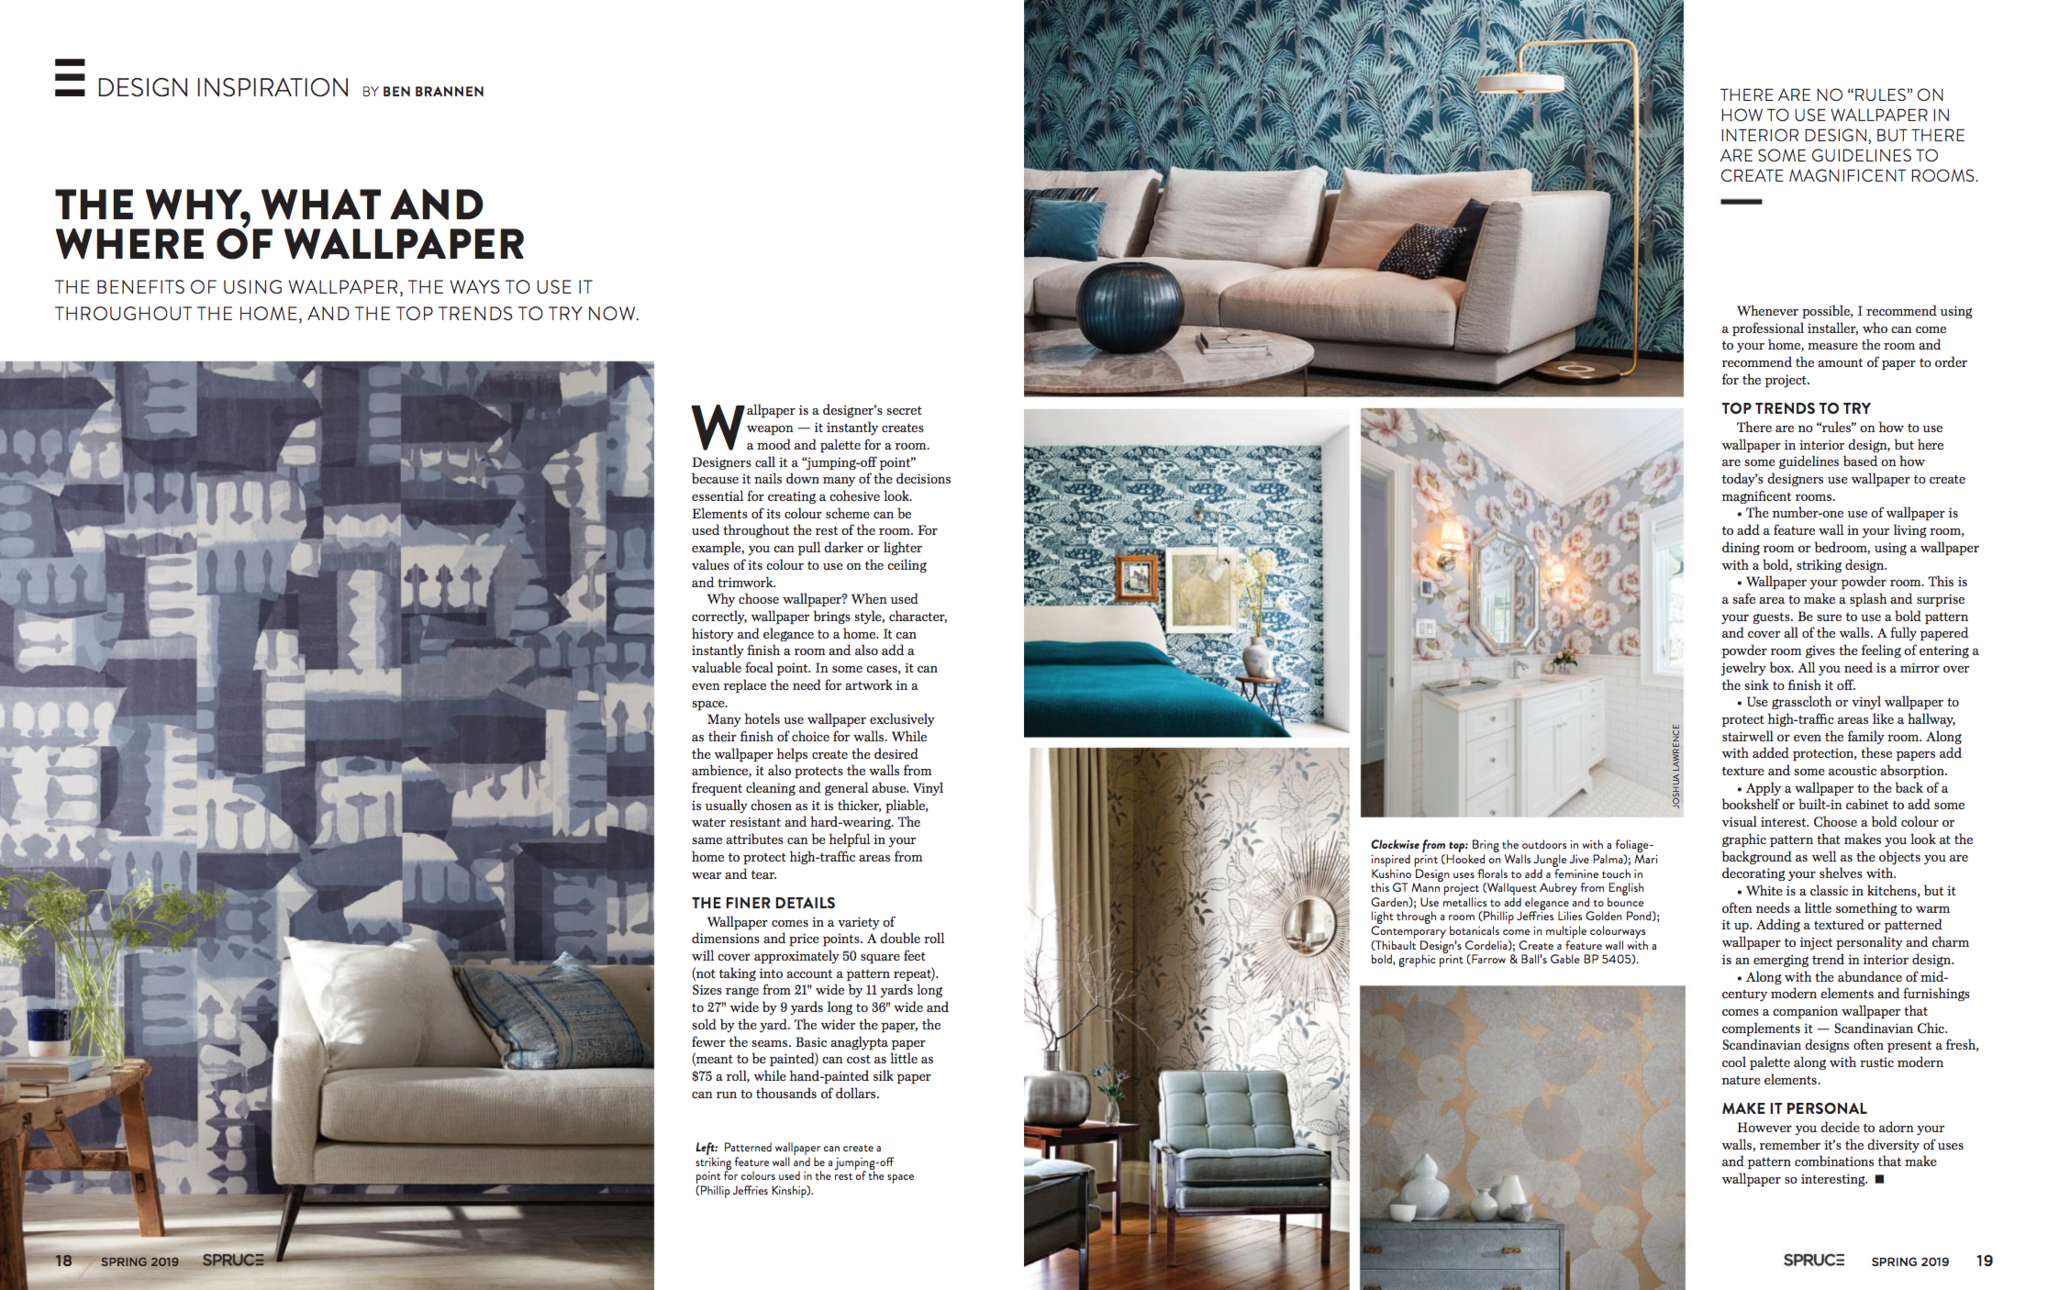 THE WHY WHAT AND WHERE OF WALLPAPER